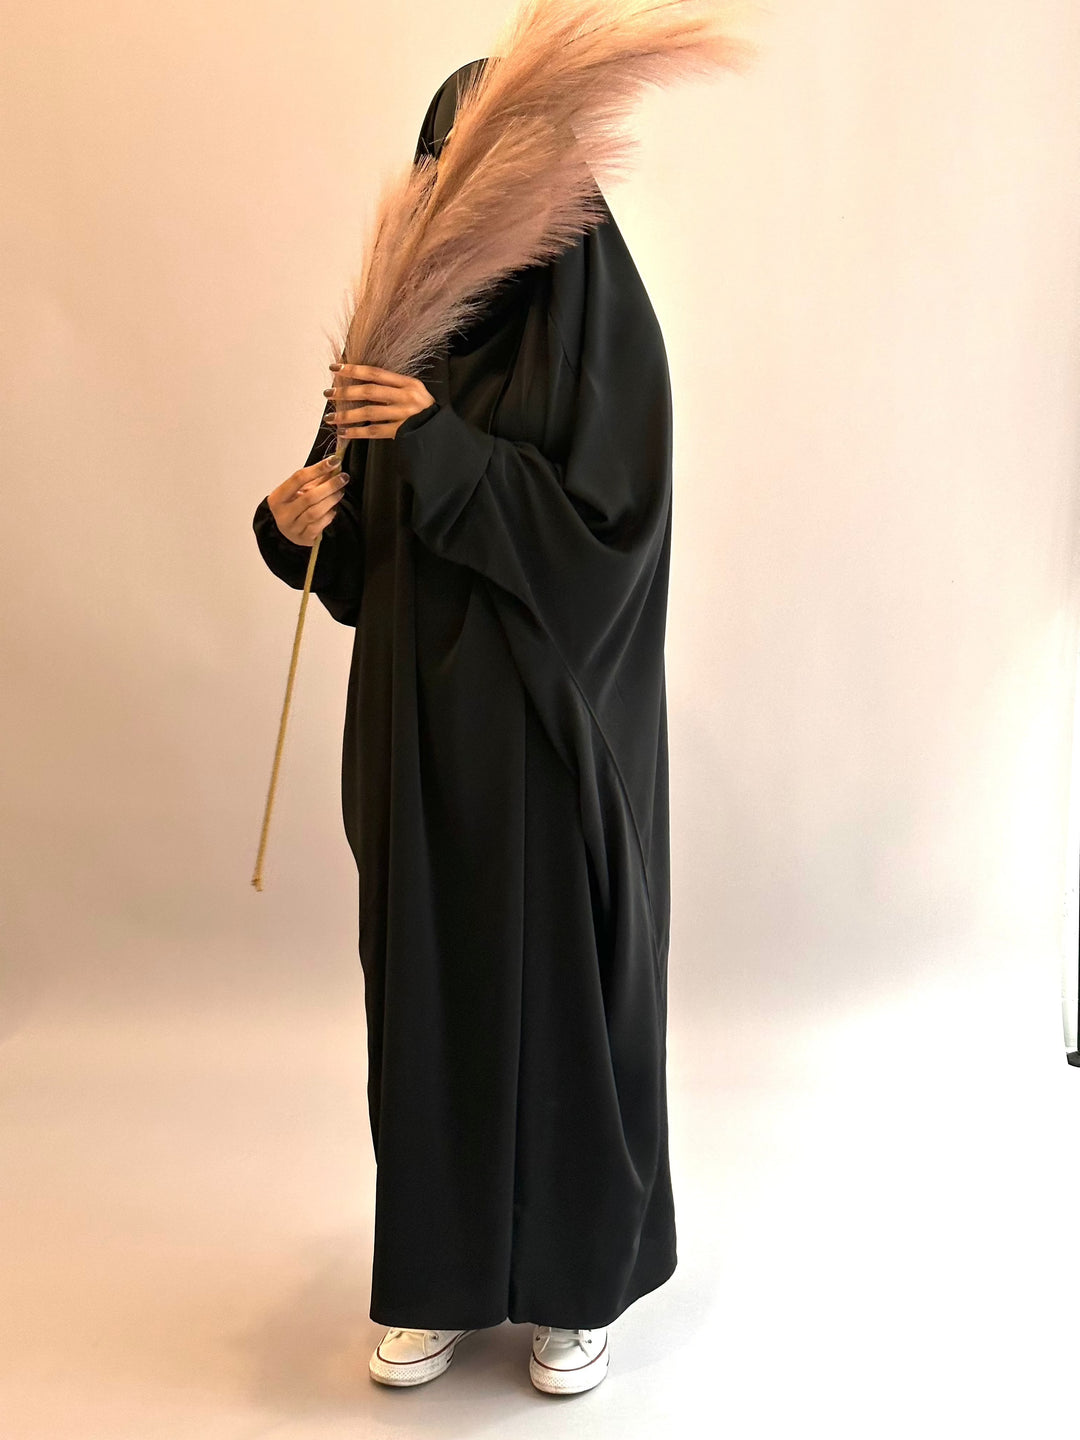 Get trendy with Sarah Niqab Jilbab - Black -  available at Voilee NY. Grab yours for $17.99 today!